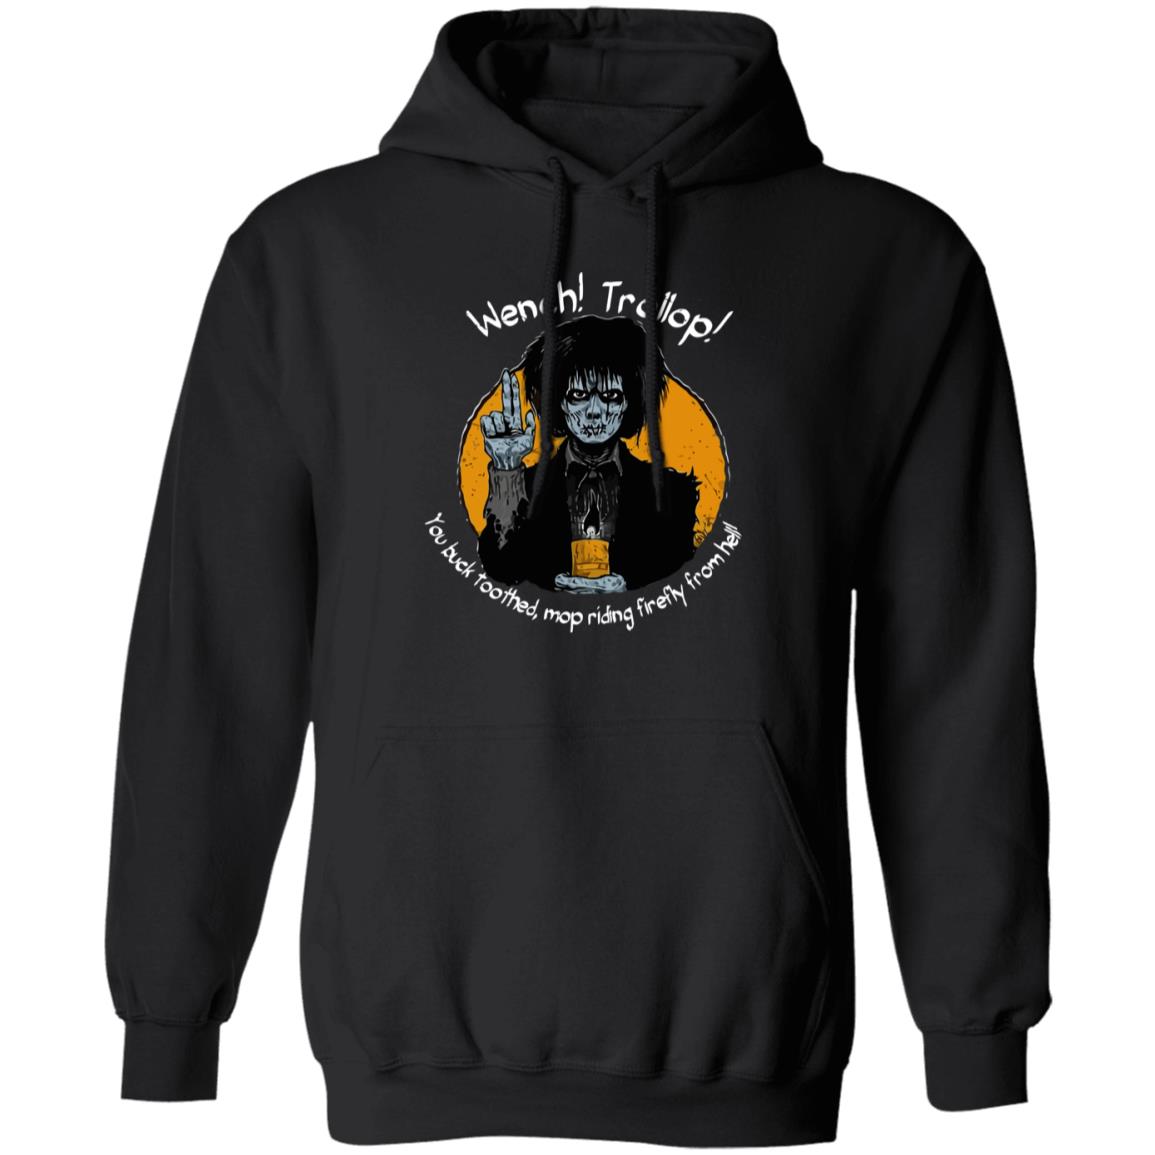 Wench Trollop You Buck Toothed Mop Riding Firefly From Hell Shirt 1